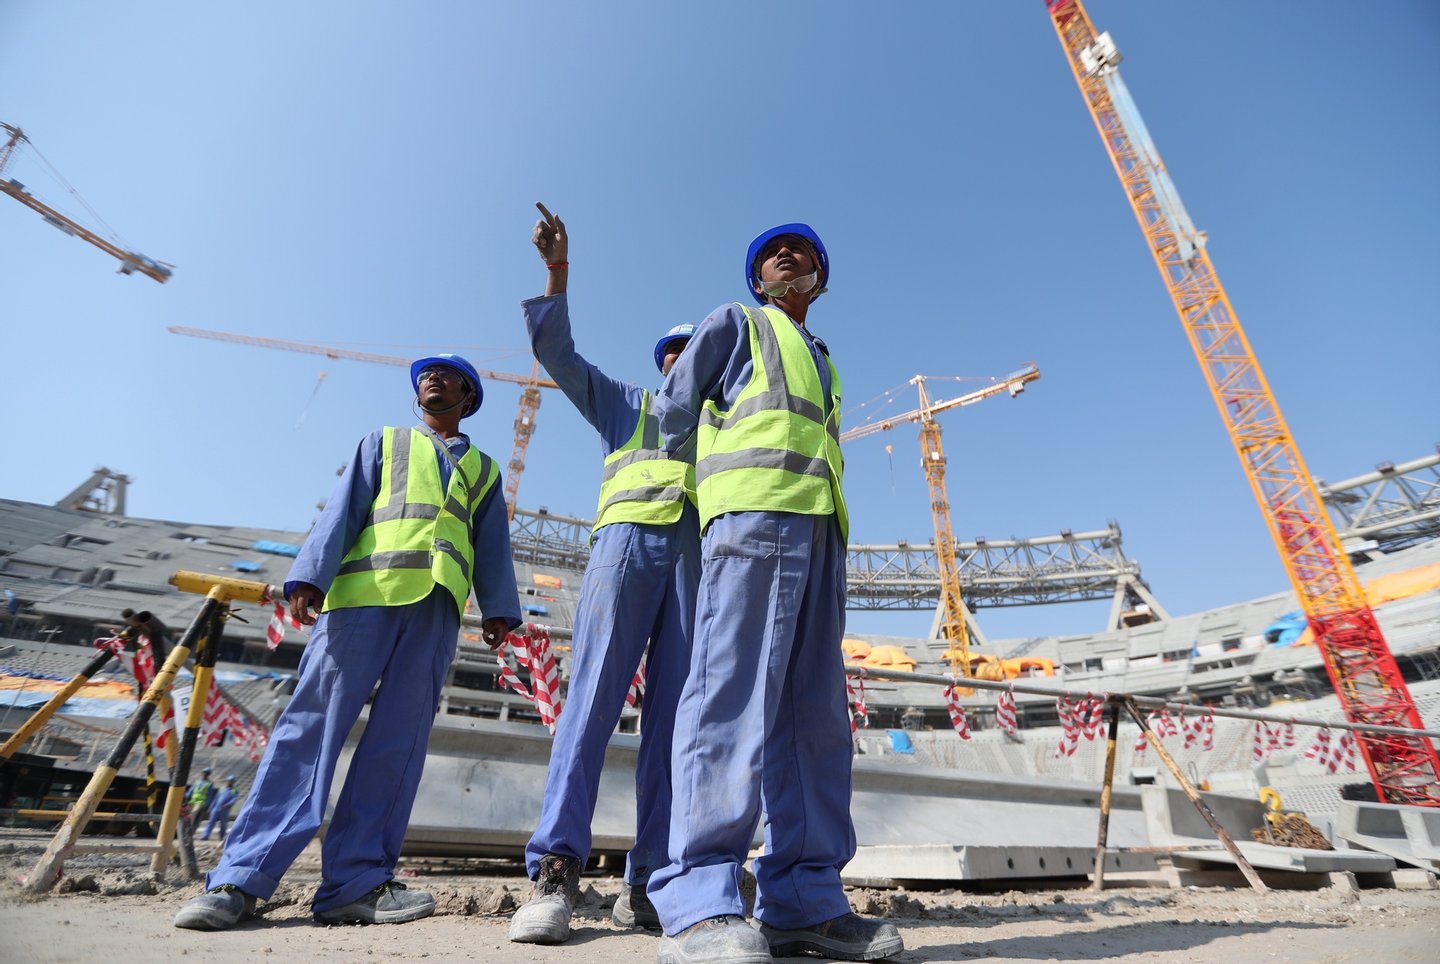 epa08083065 Construction workers at Lusail Stadium during a media tour in Doha, Qatar, 20 December 2019. Lusail Stadium is one of the eight stadiums build for the FIFA World Cup 2022 in Qatar. EPA/ALI HAIDER